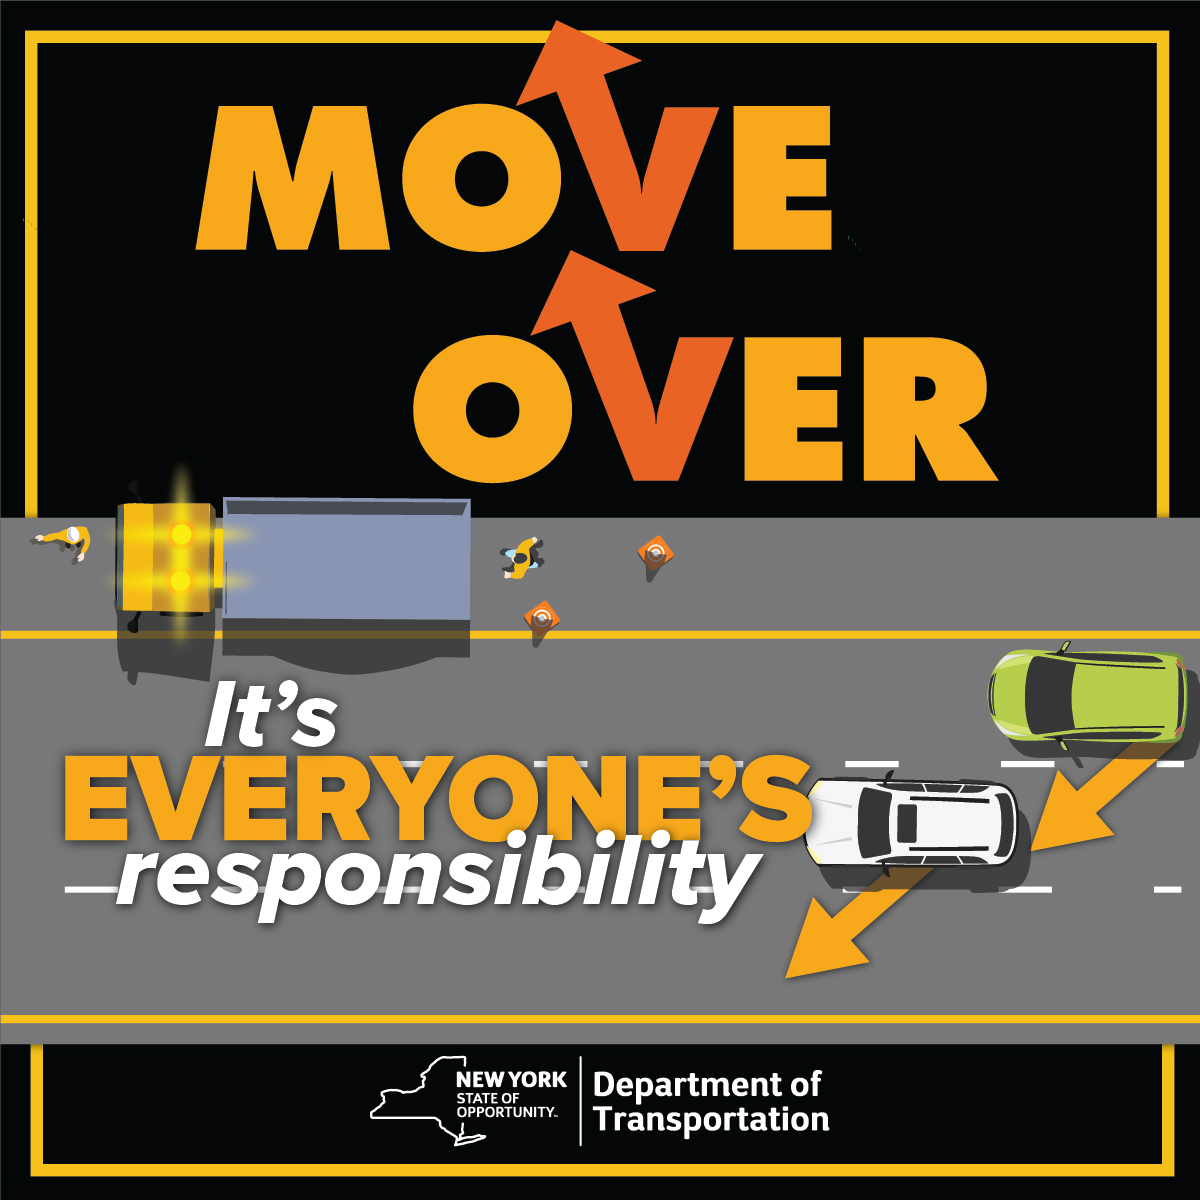 NY's Move Over Law protects ALL VEHICLES on the shoulder, including work zones. On a 3-lane highway, moving over from the middle lane isn't just about giving space; it allows vehicles in the closest lane to the work zone or disabled vehicles the room to safely merge. #MoveOver